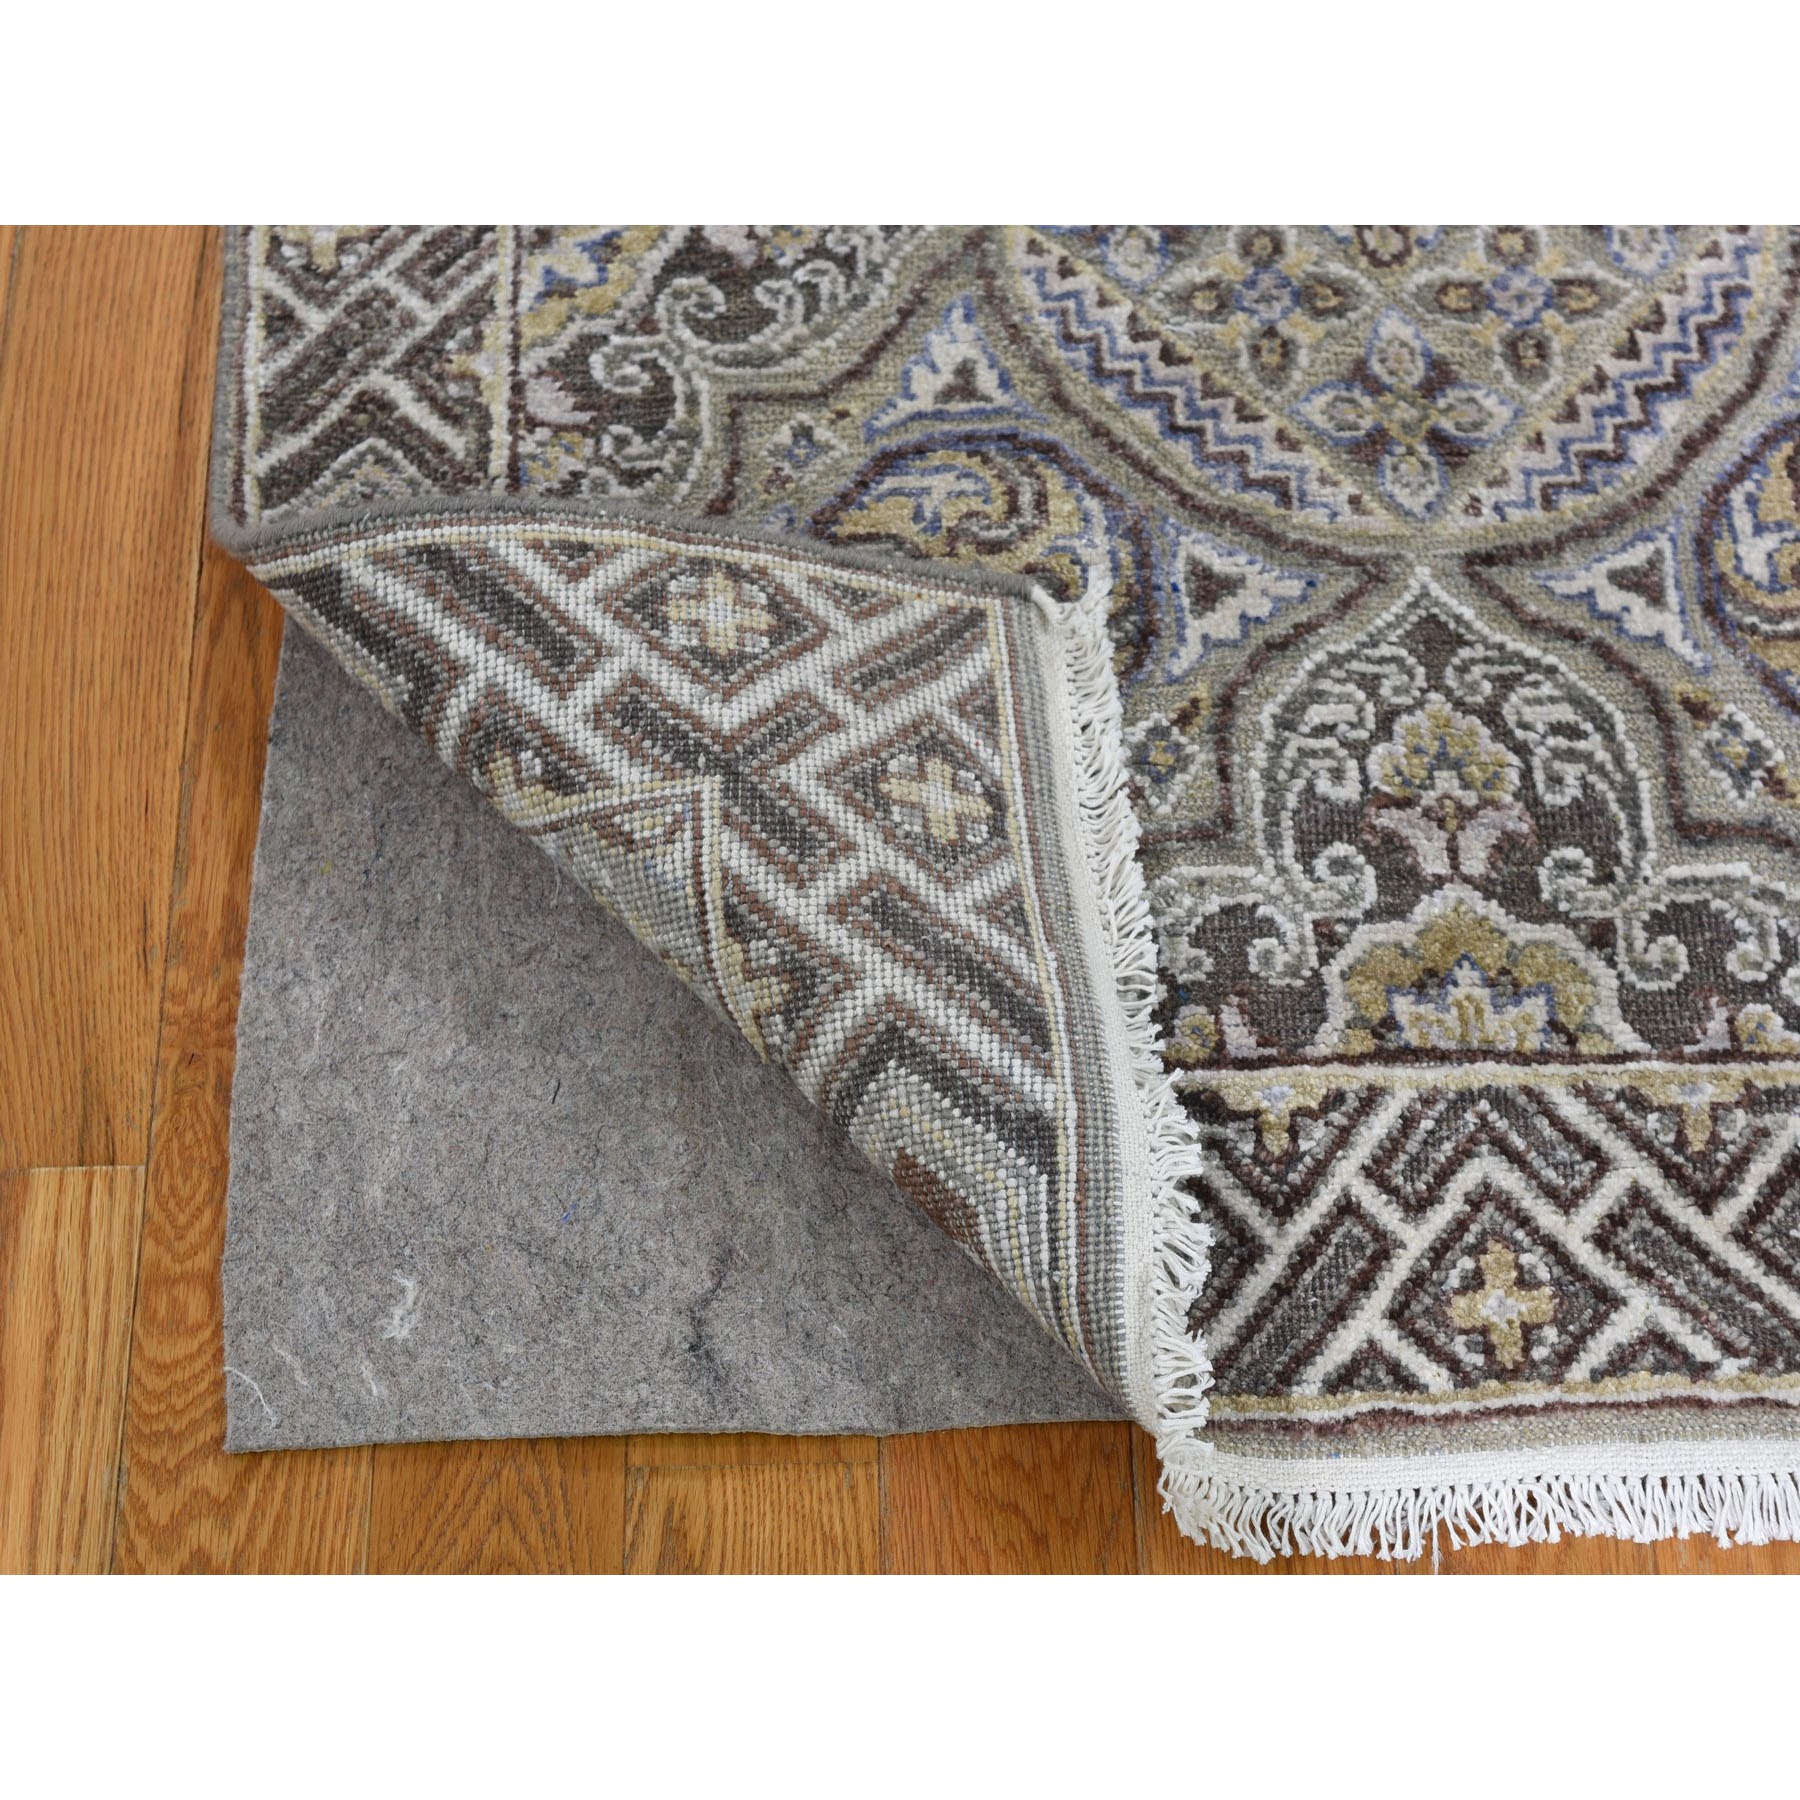 3-x5-2  Textured Wool and Silk Mughal Inspired Medallions Hand-Knotted Oriental Rug 